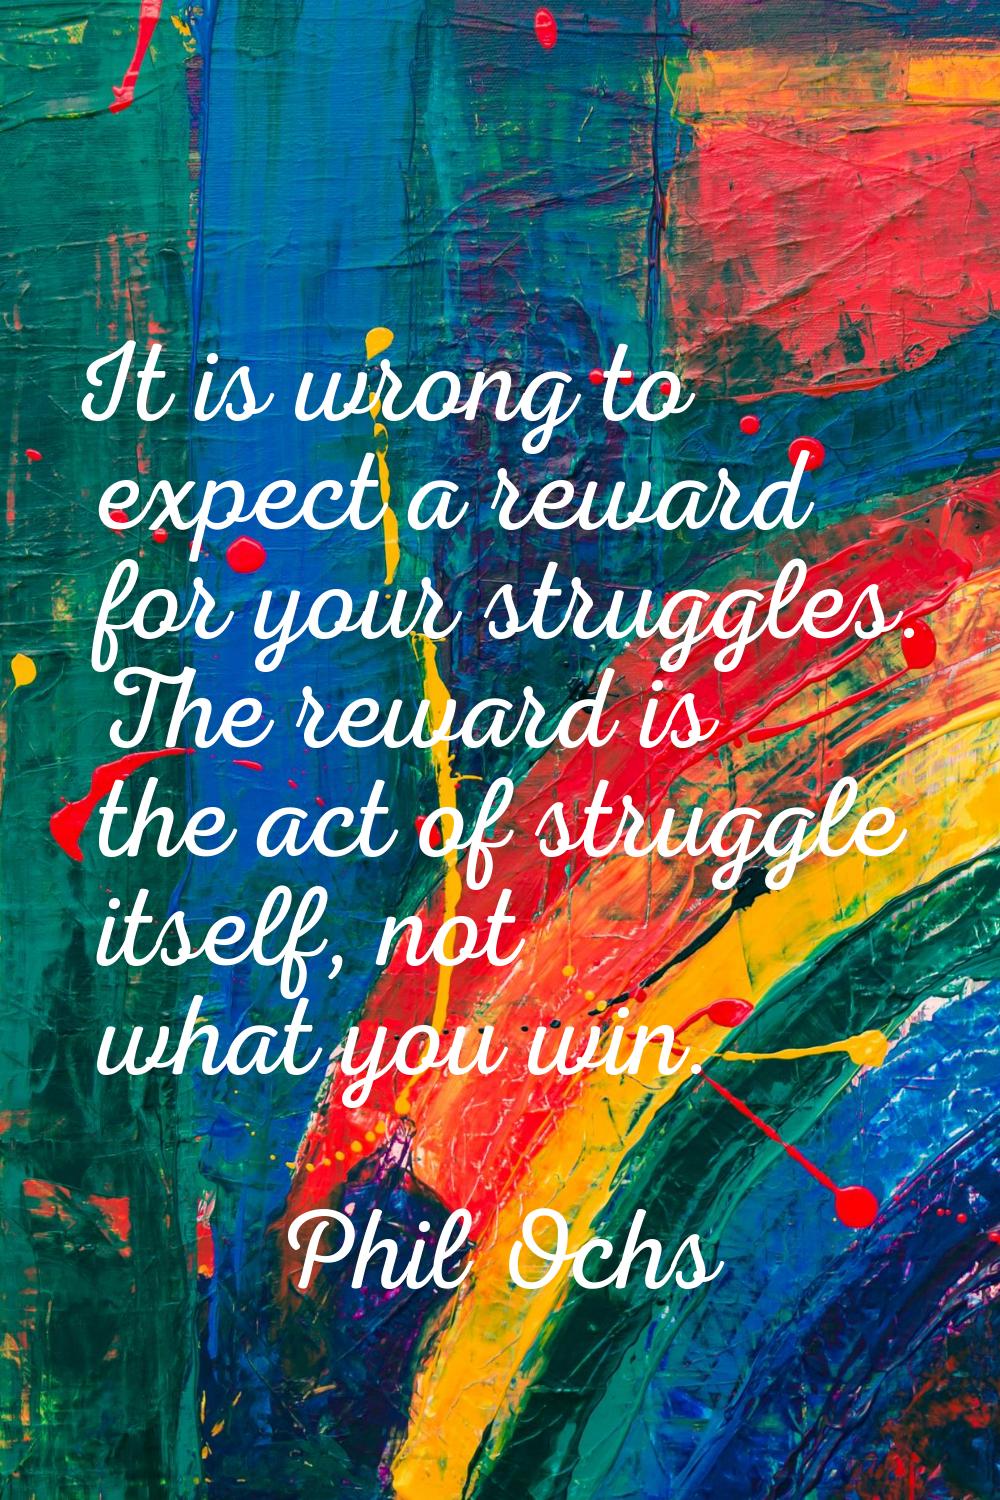 It is wrong to expect a reward for your struggles. The reward is the act of struggle itself, not wh